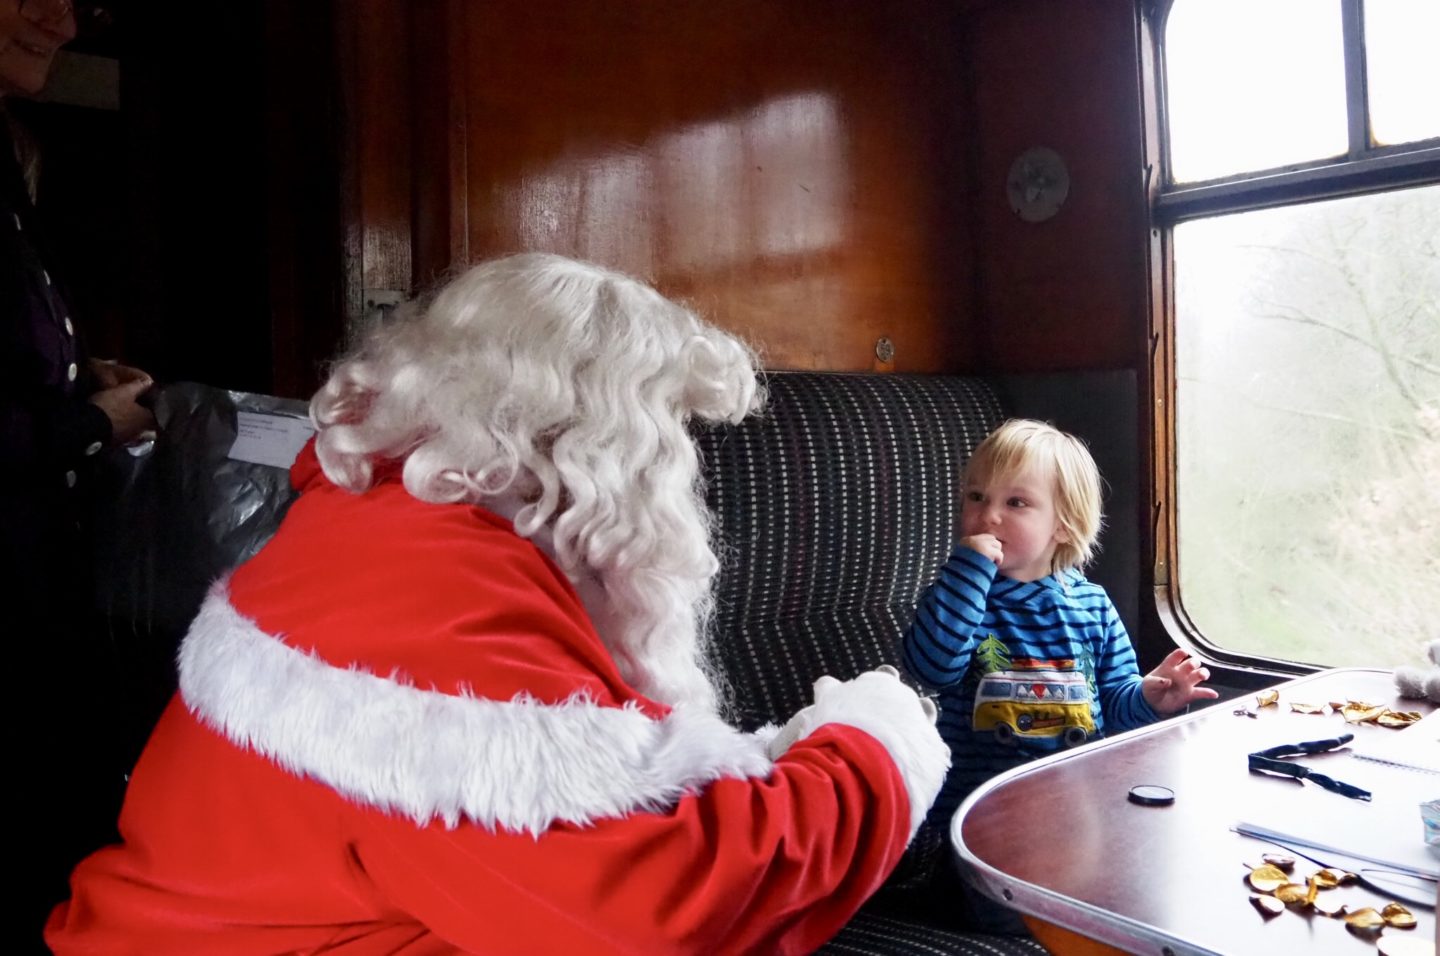 Churnet Valley Railway Santa and Steam: Review